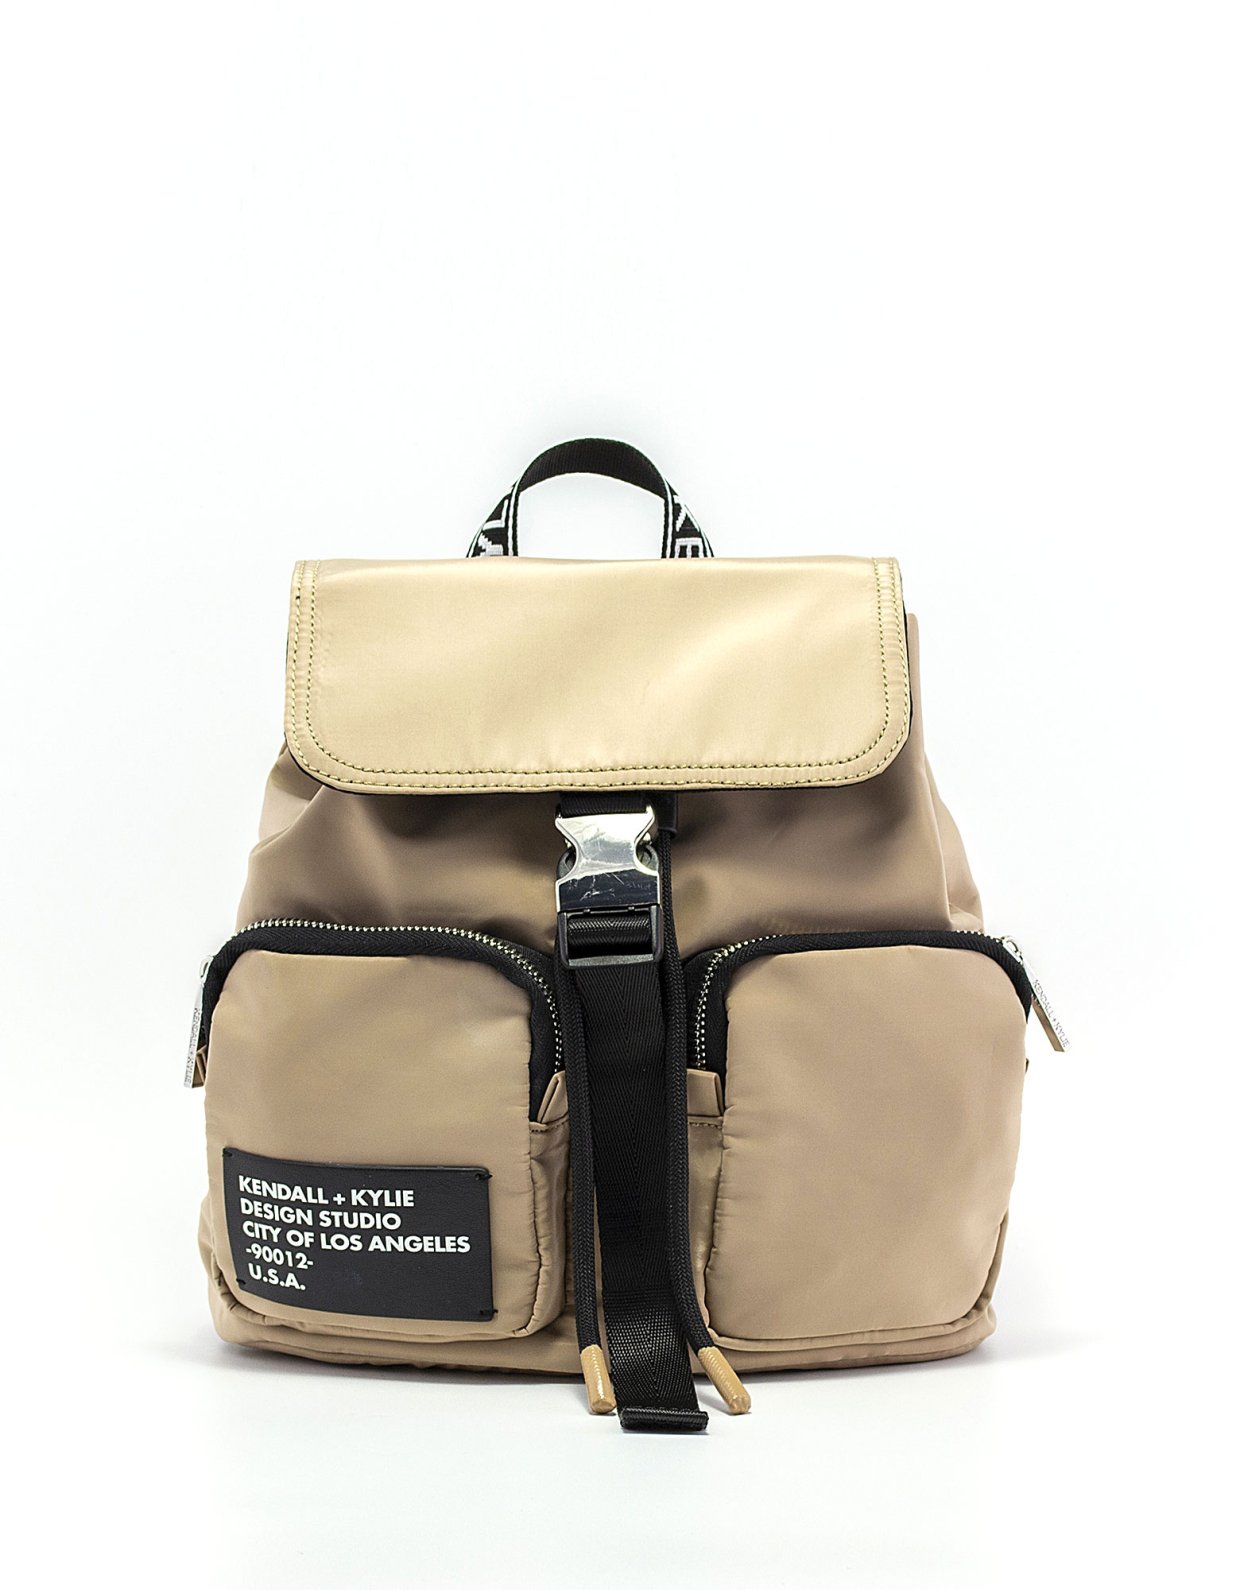 Kendall + Kylie Jesse backpack taupe